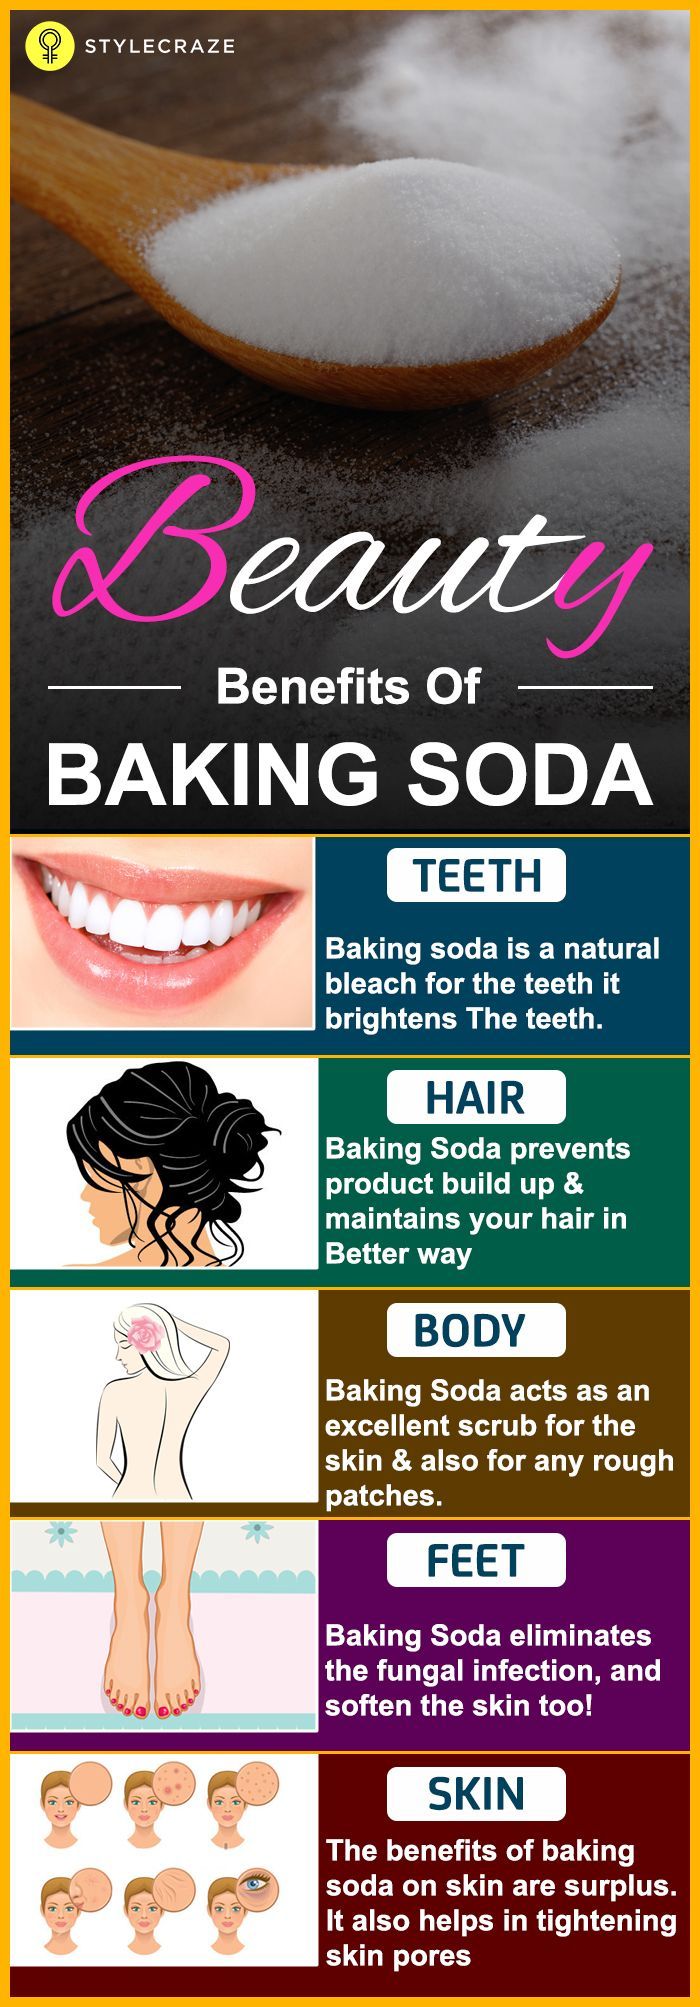 [ad_1]

Baking soda has been used in skin-care for quite a long time. It is an exfoliator, a skin brightener, and to even out complexion. It is a natural, effective and budget-friendly way to help with many beauty related issues. Here…